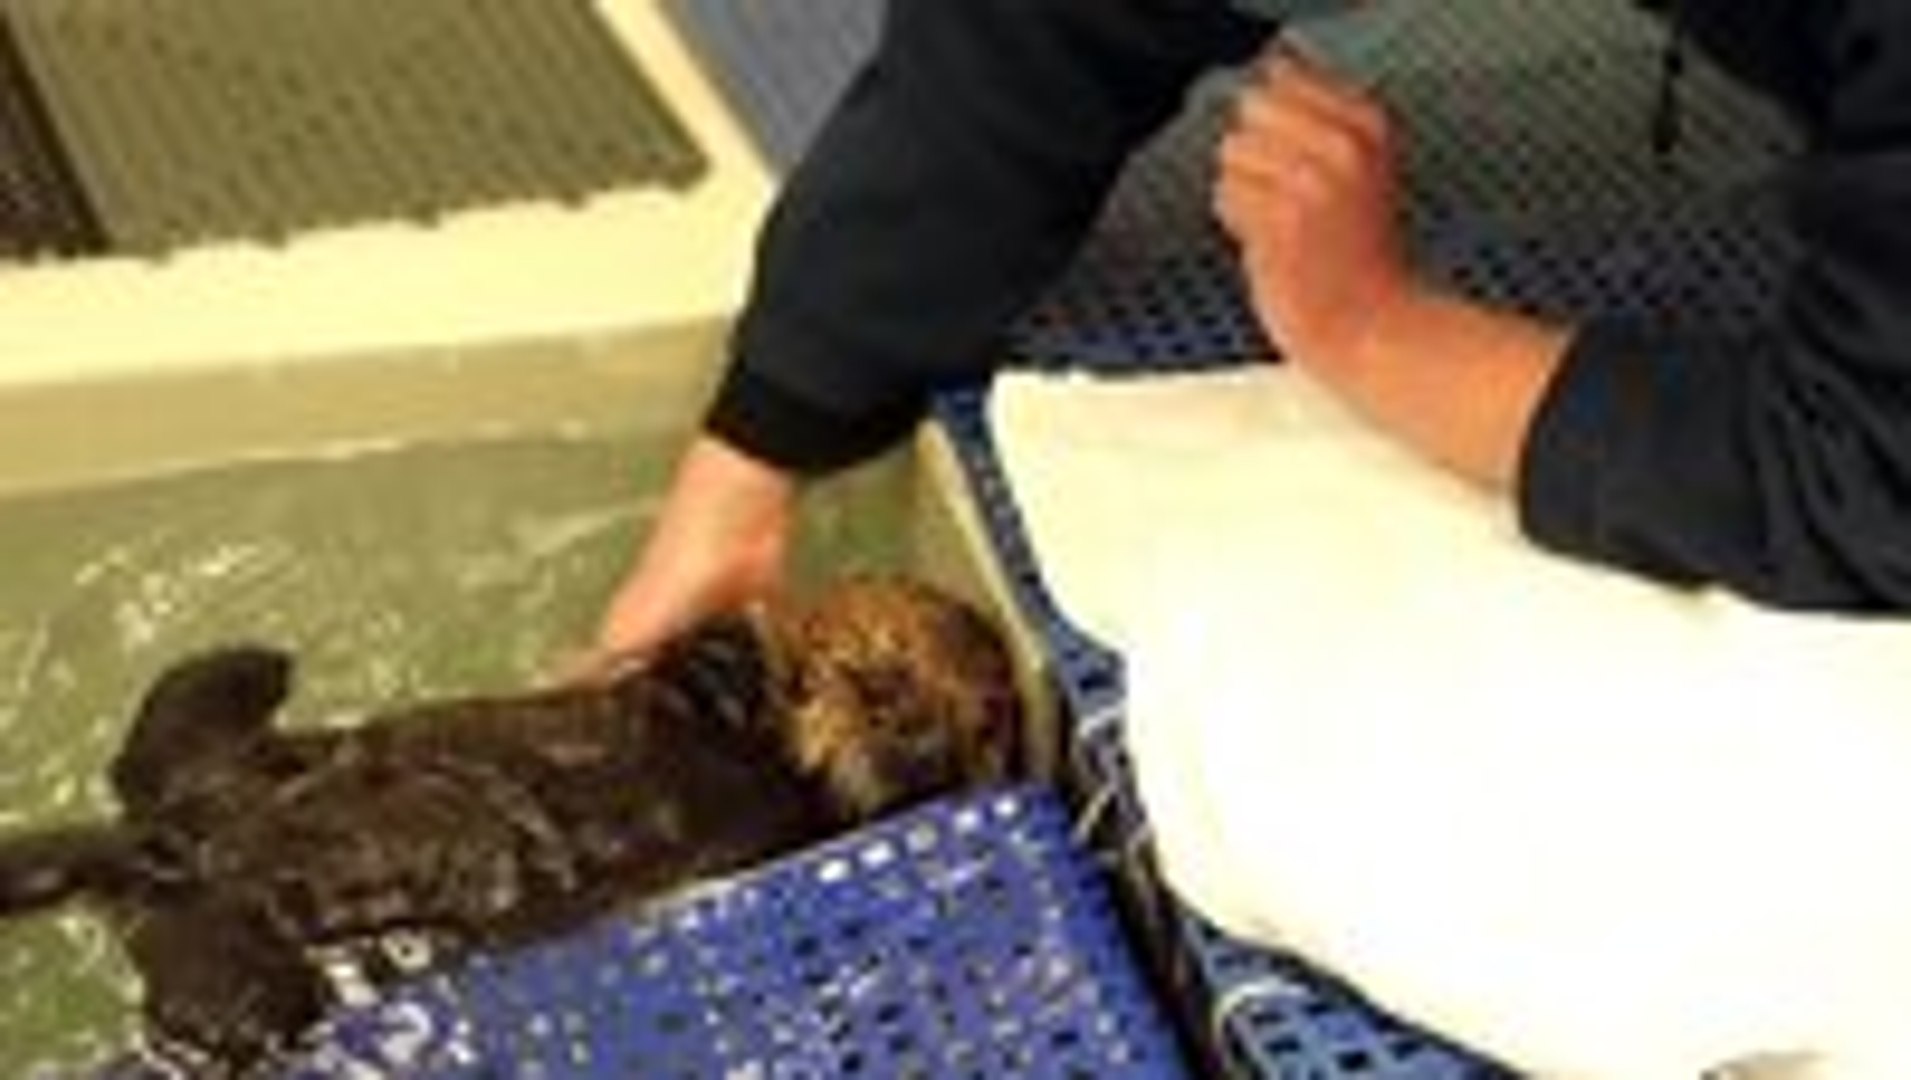 Adorable otter baby learning to swim